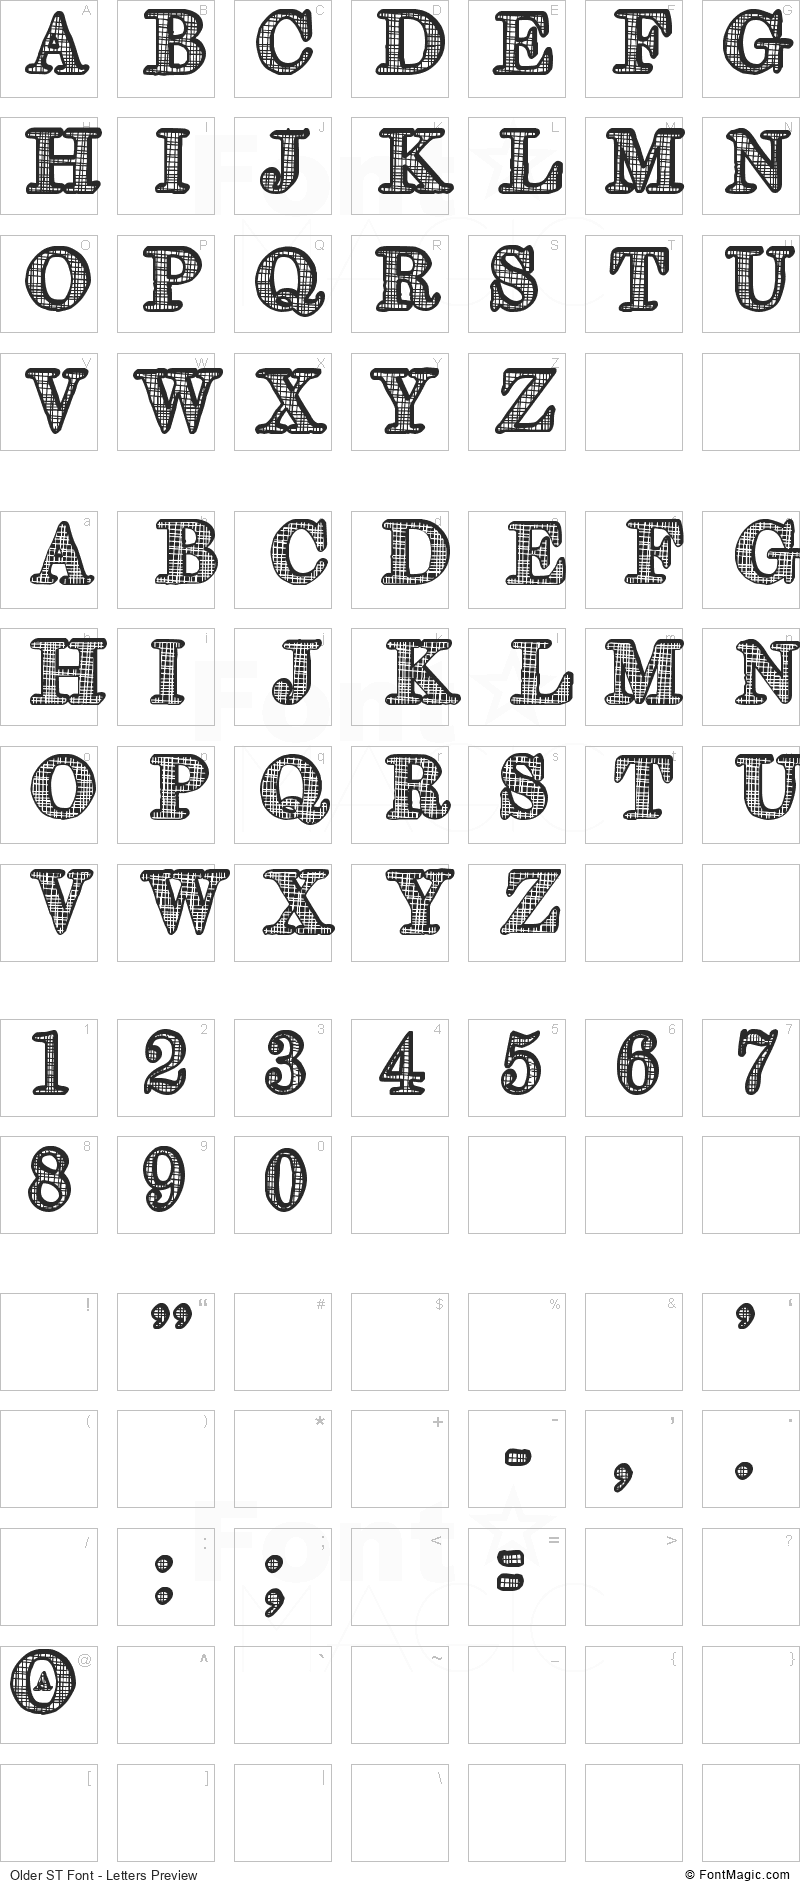 Older ST Font - All Latters Preview Chart